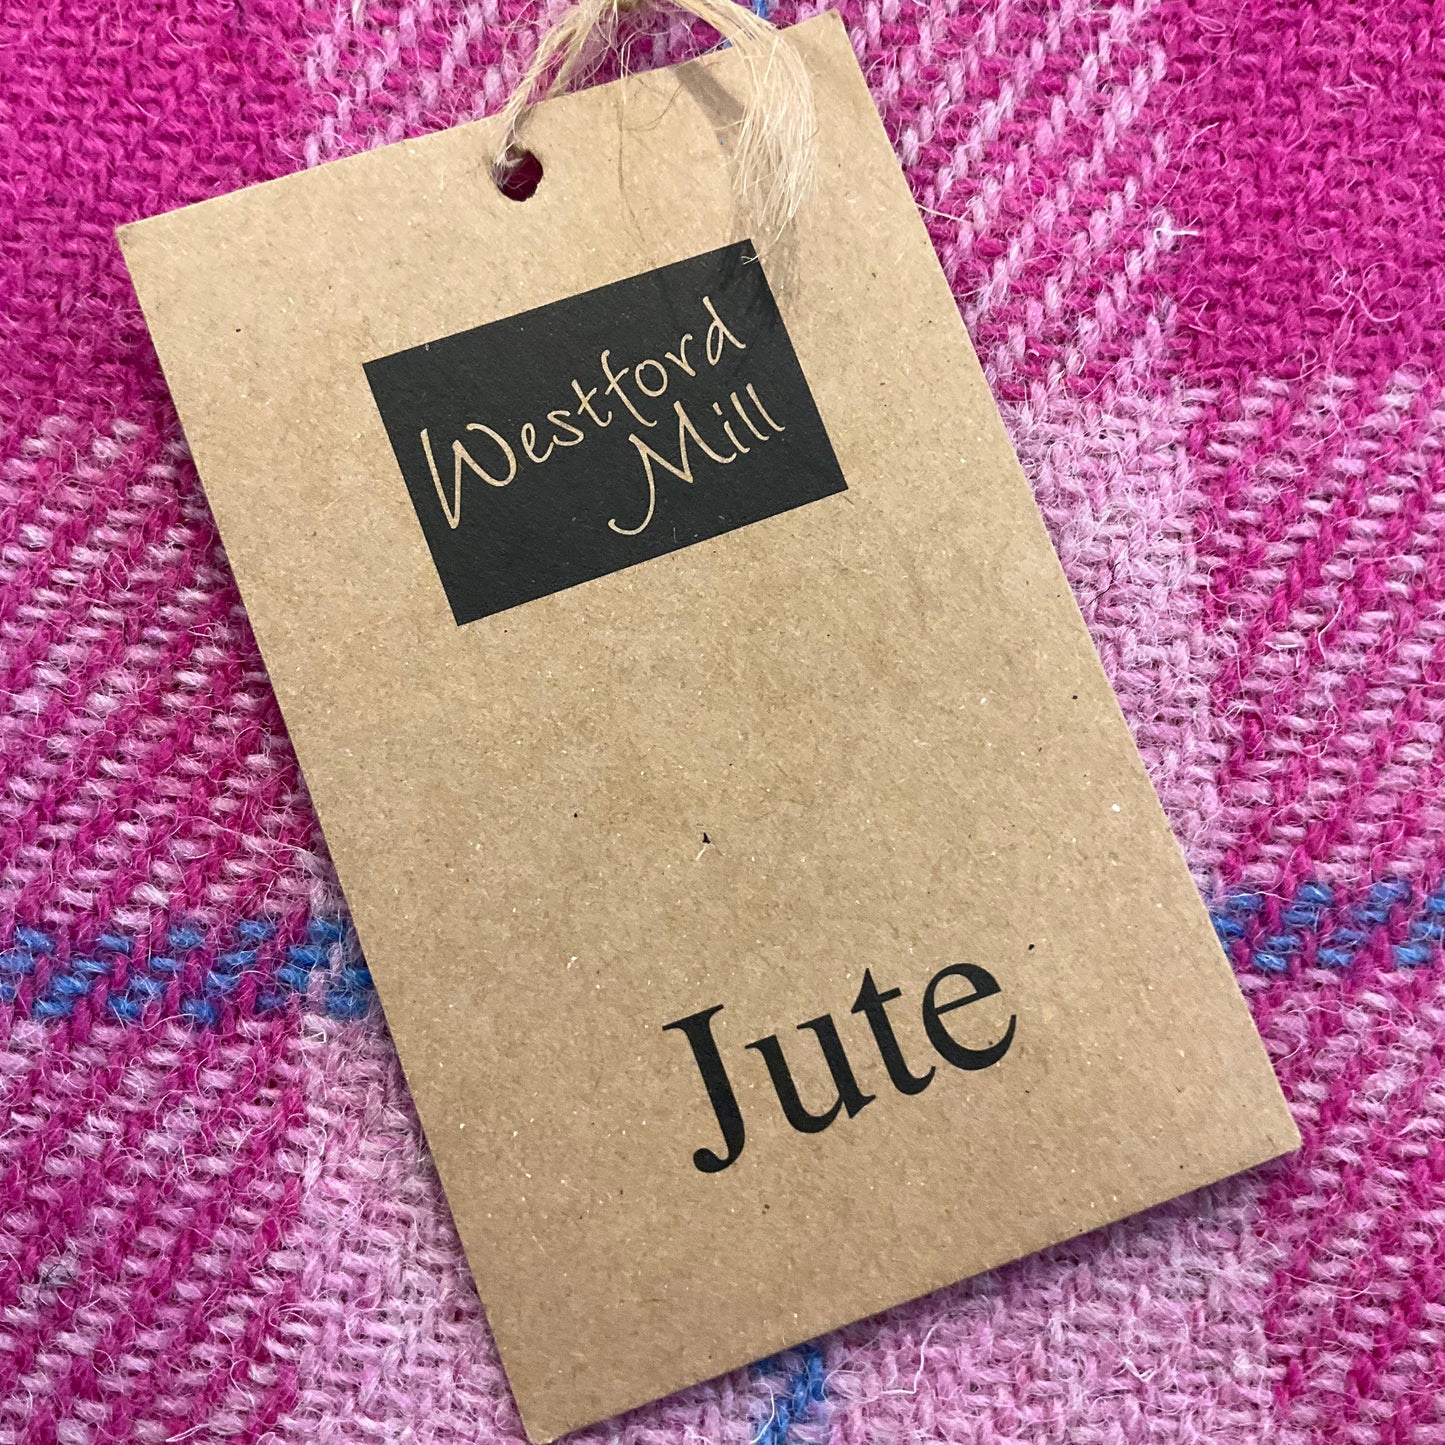 Vintage, Unused Harris Tweed and Jute Shopper by Westford Mill who produce a thoughtfully designed collection of eco-friendly products